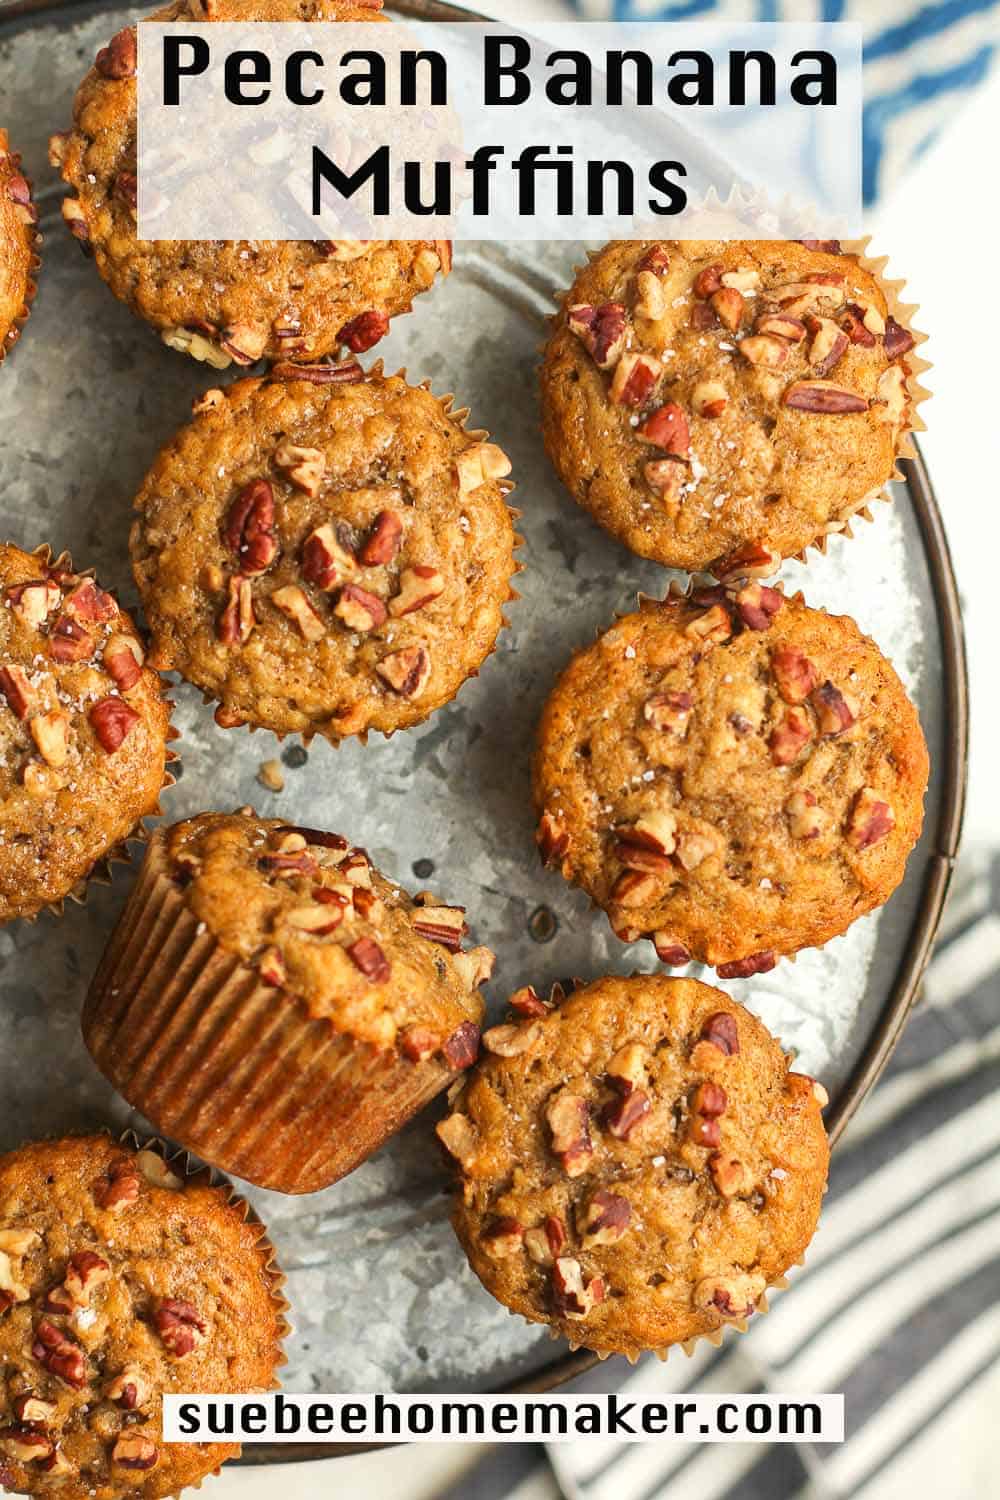 A platter of pecan banana muffins with pecans on top.